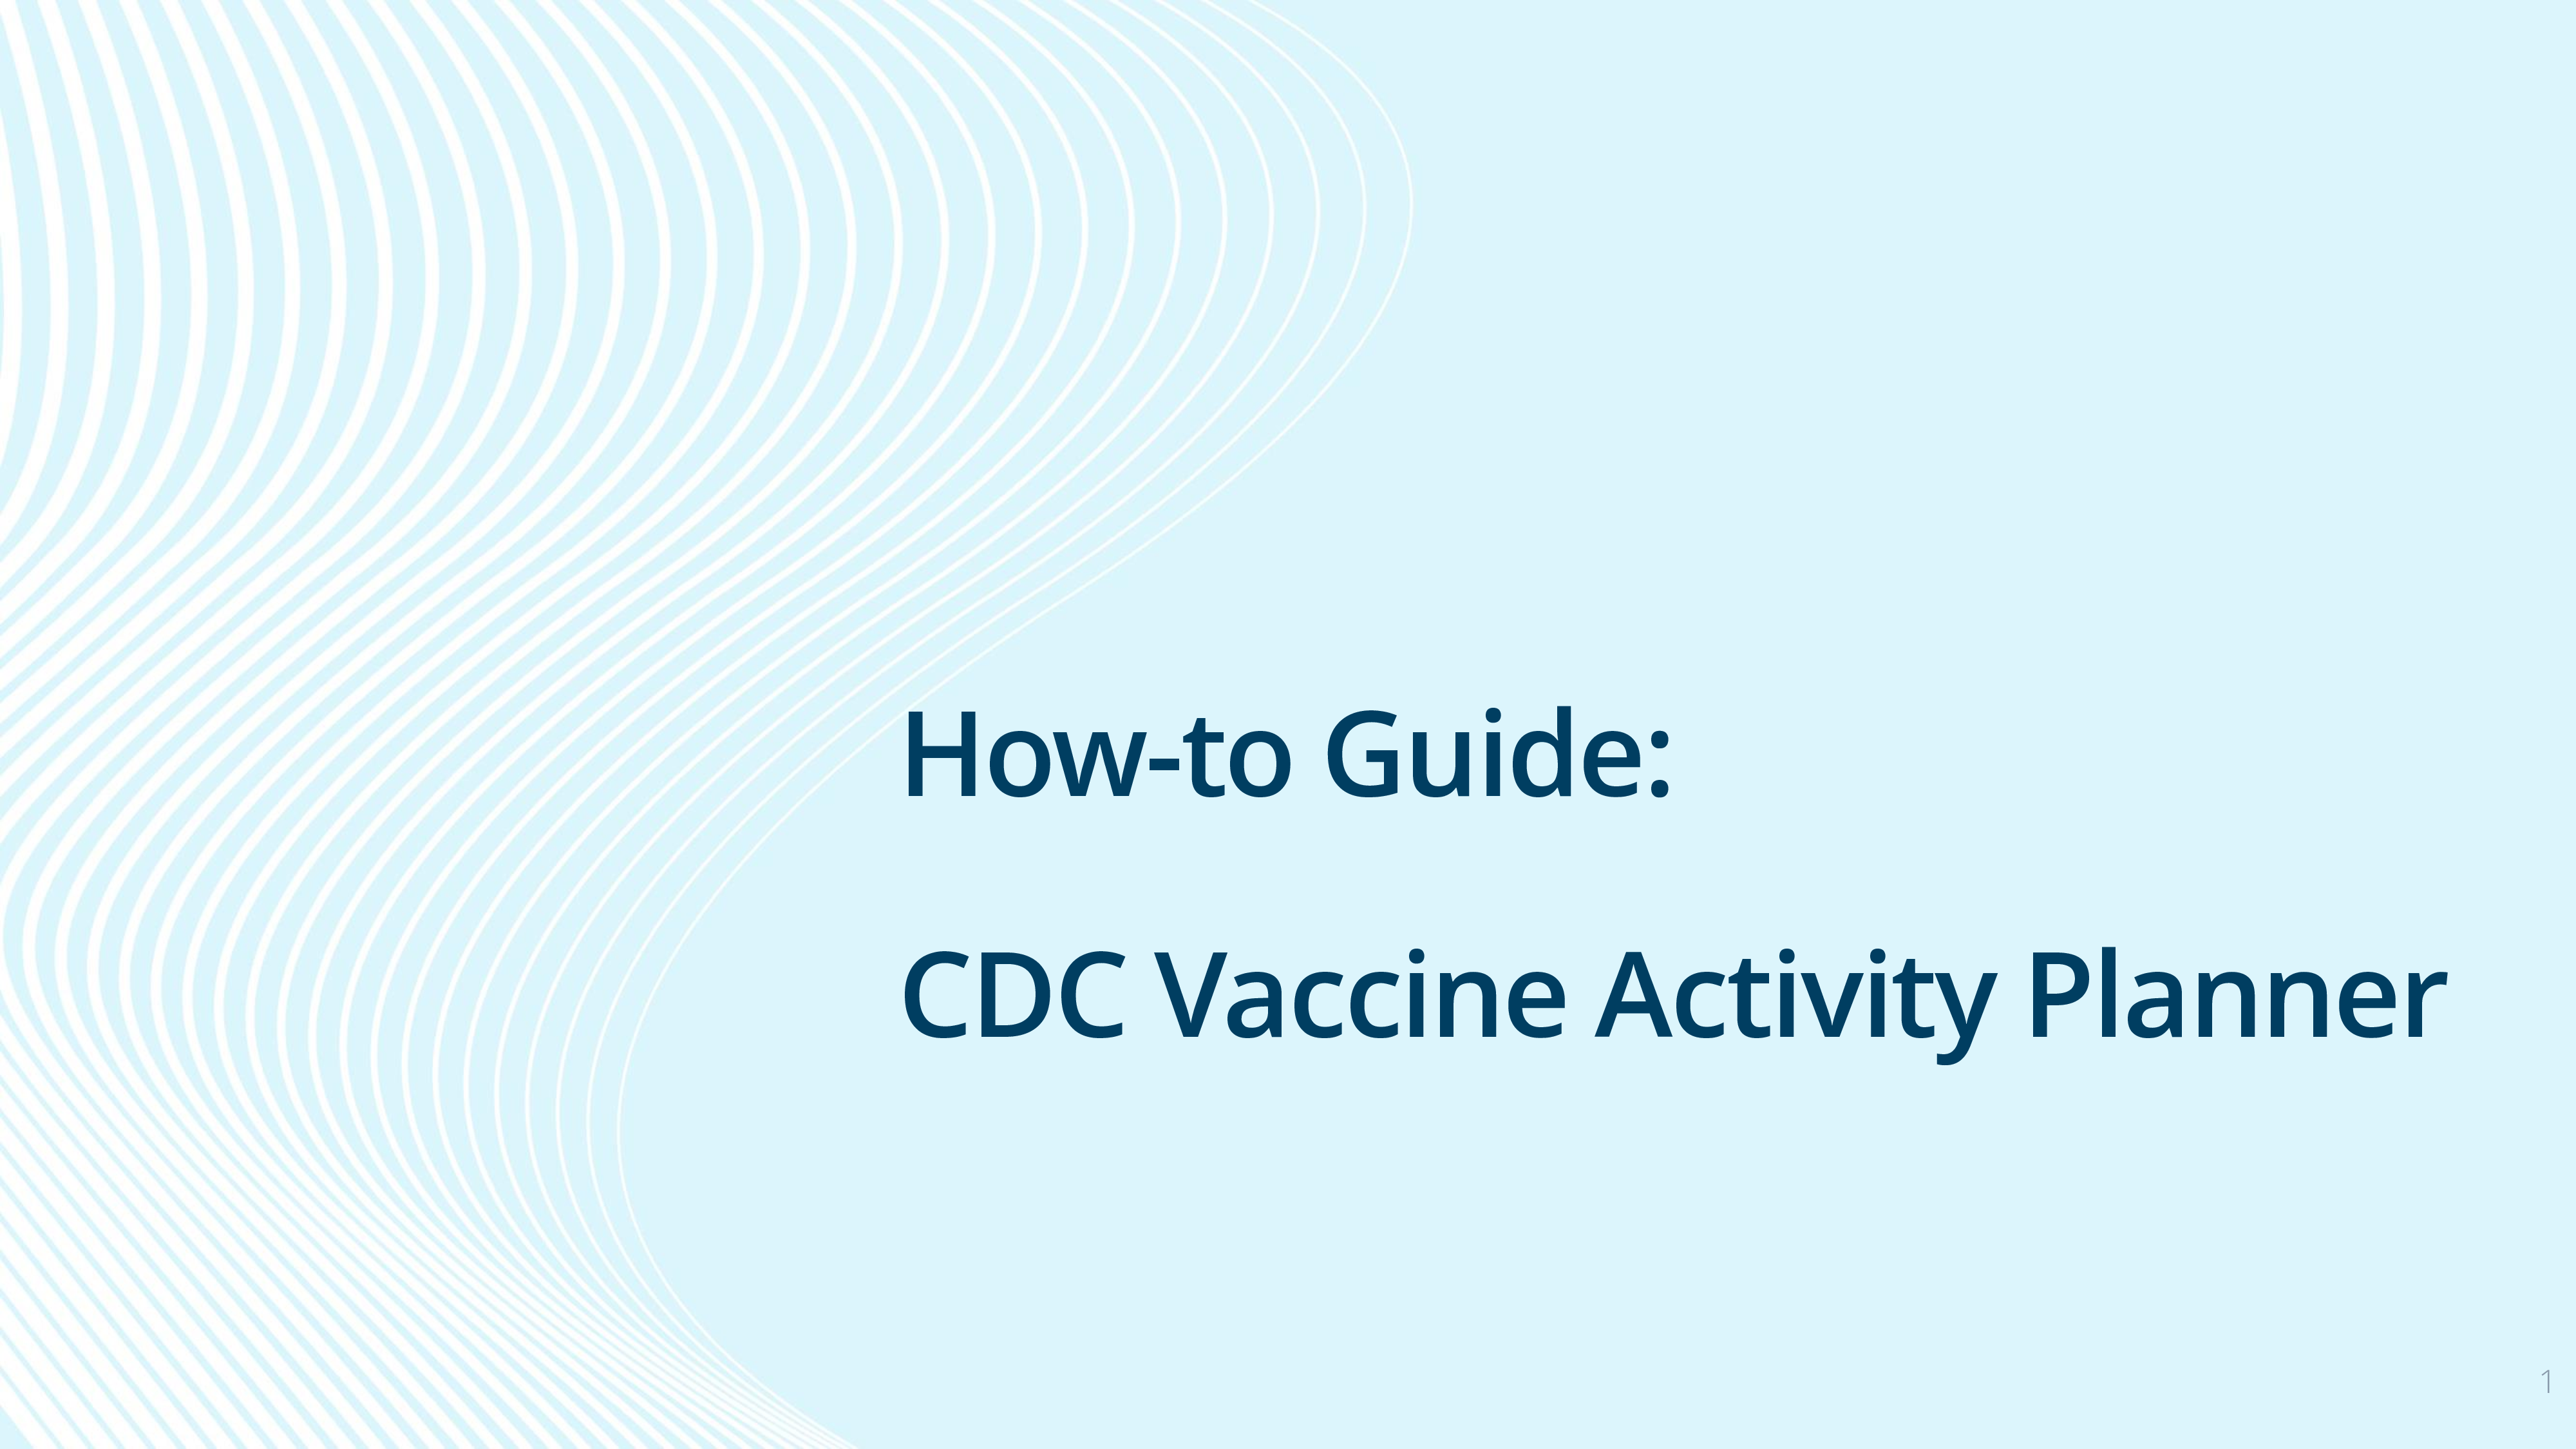 CDC Vaccine Activity Planner - How-to Guide